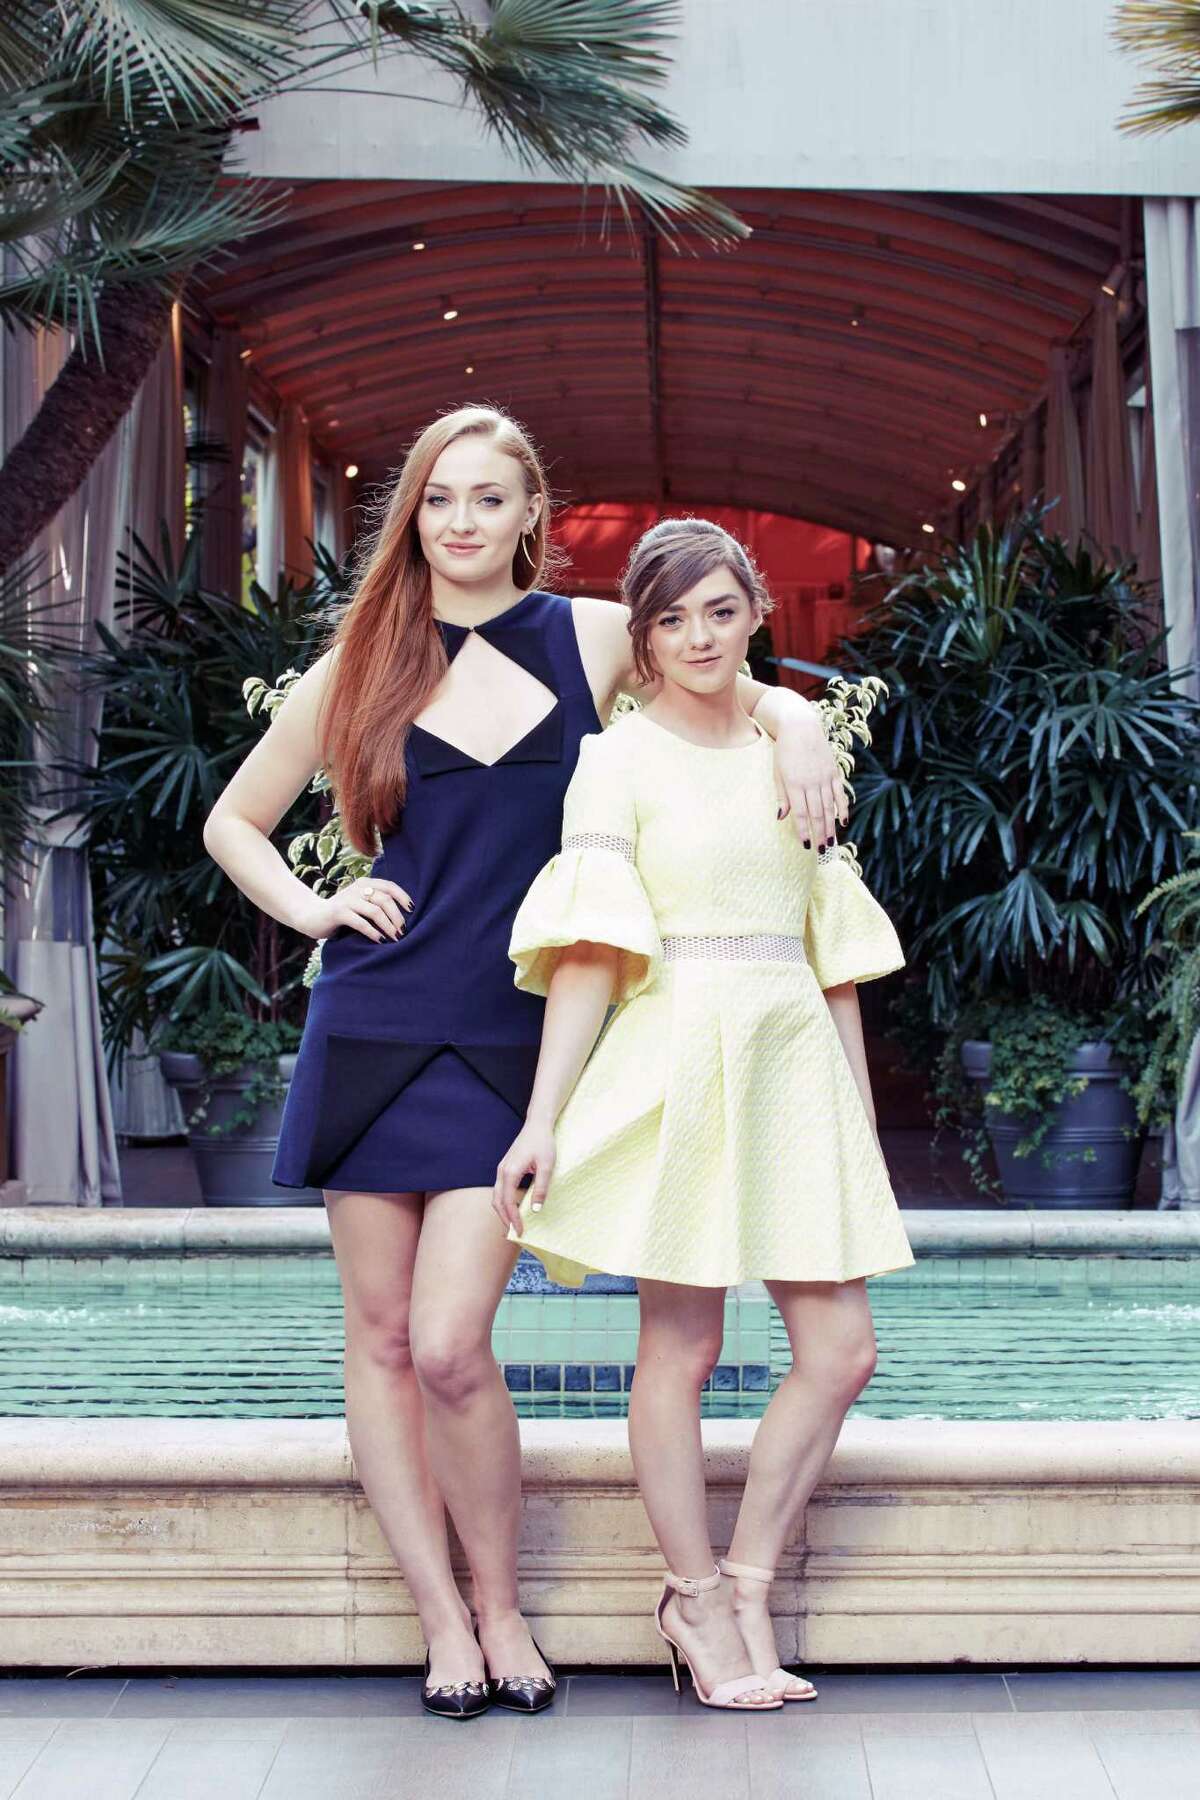 Sophie Turner, left, and Maisie Williams bonded and have been friends since their first auditions for HBO's "Game of Thrones."